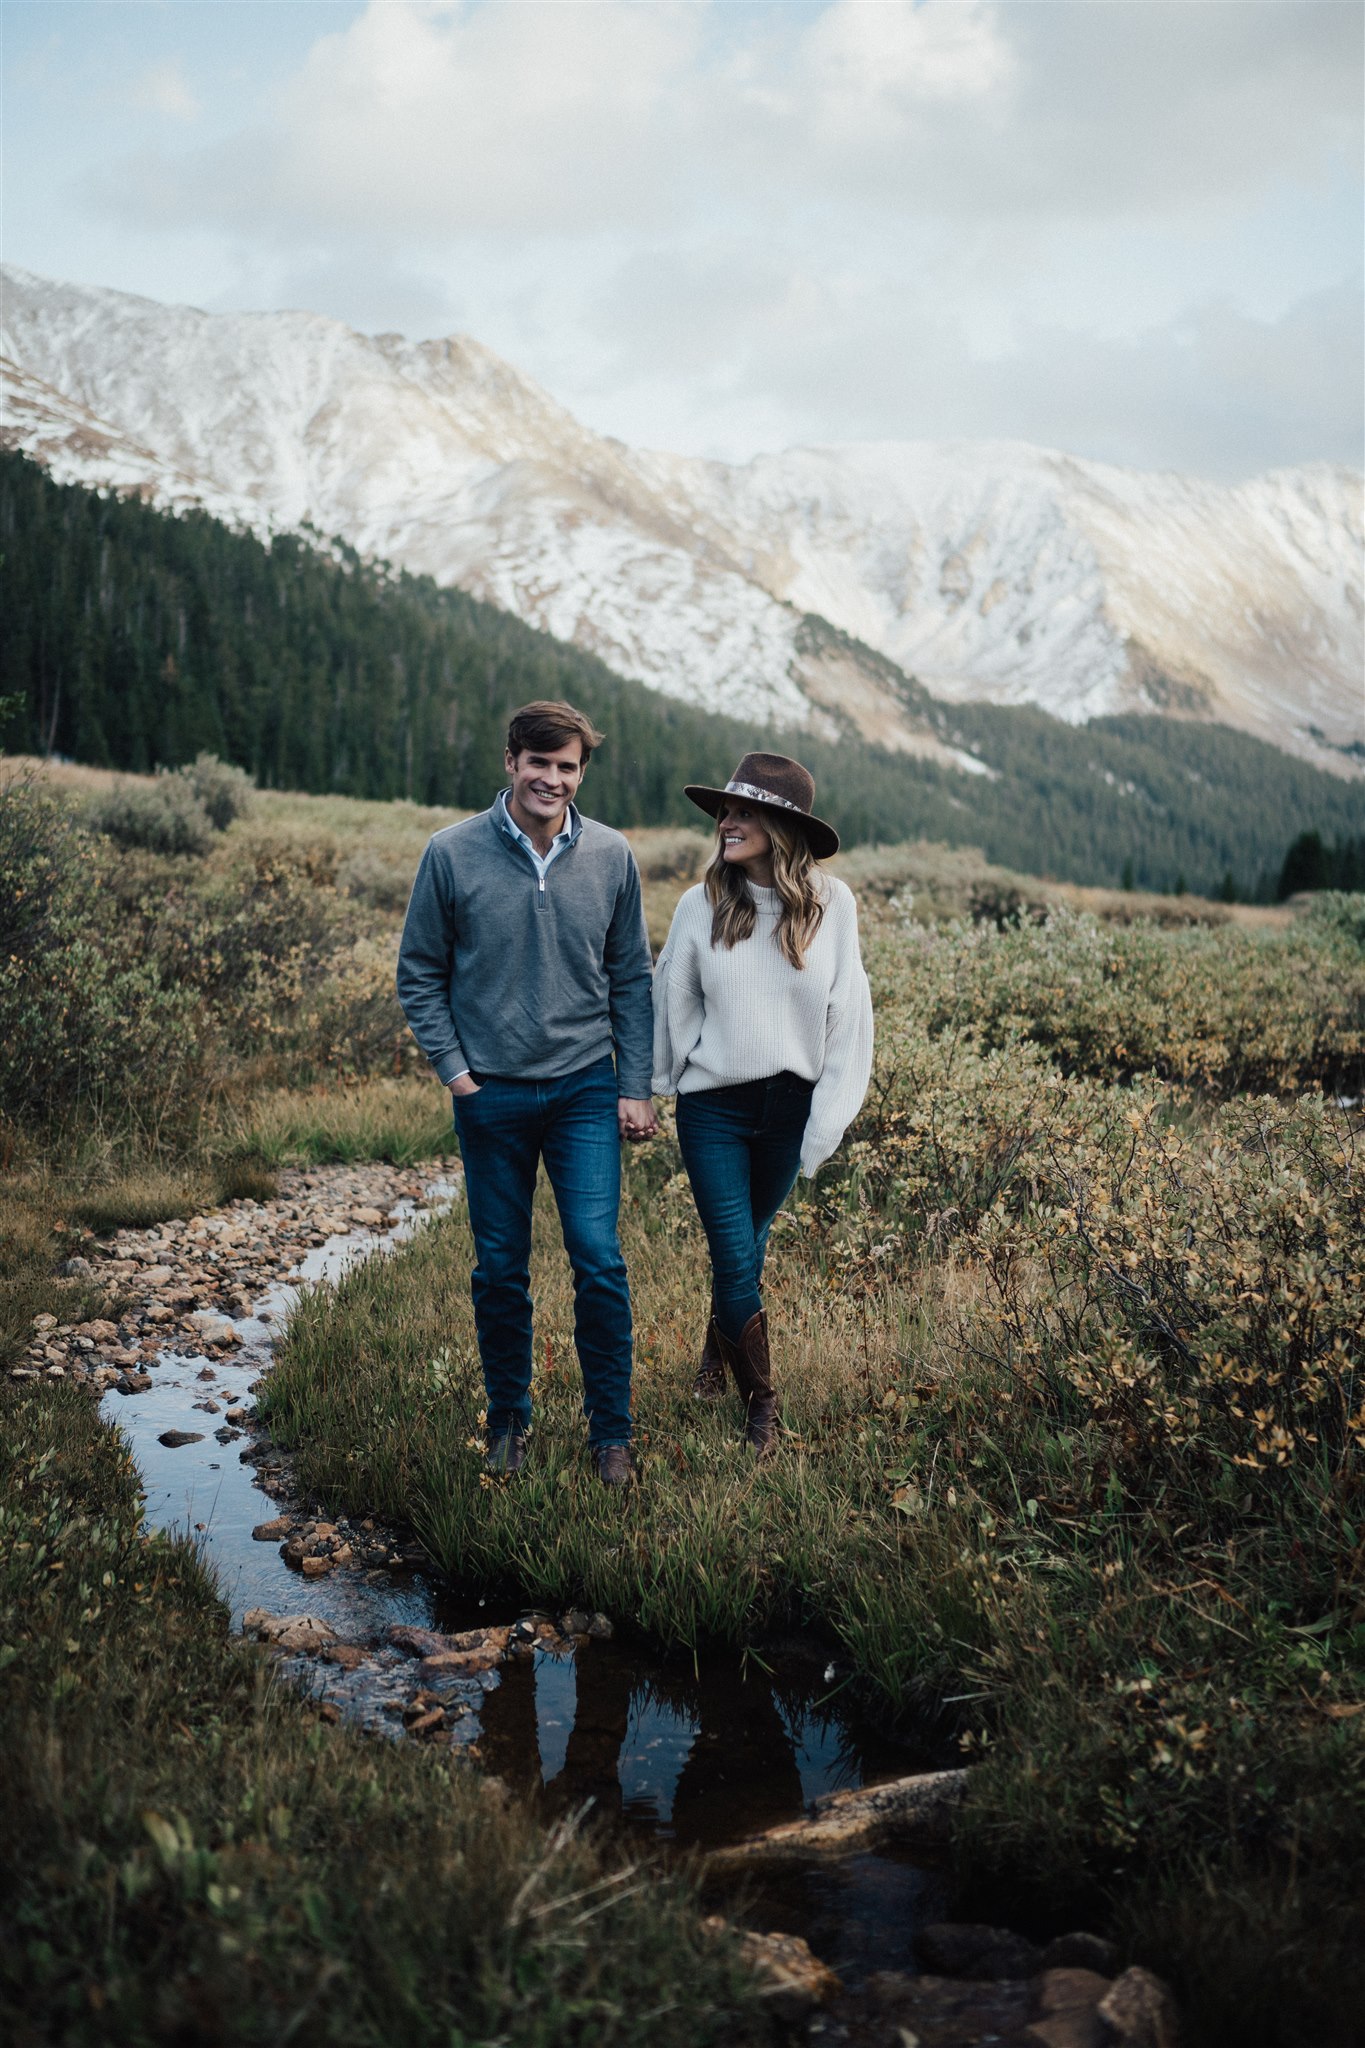 brighton and duncan butler, mountain photoshoot, moving back to Dallas, cowboy boots outfit, engagement shoot outfit idea